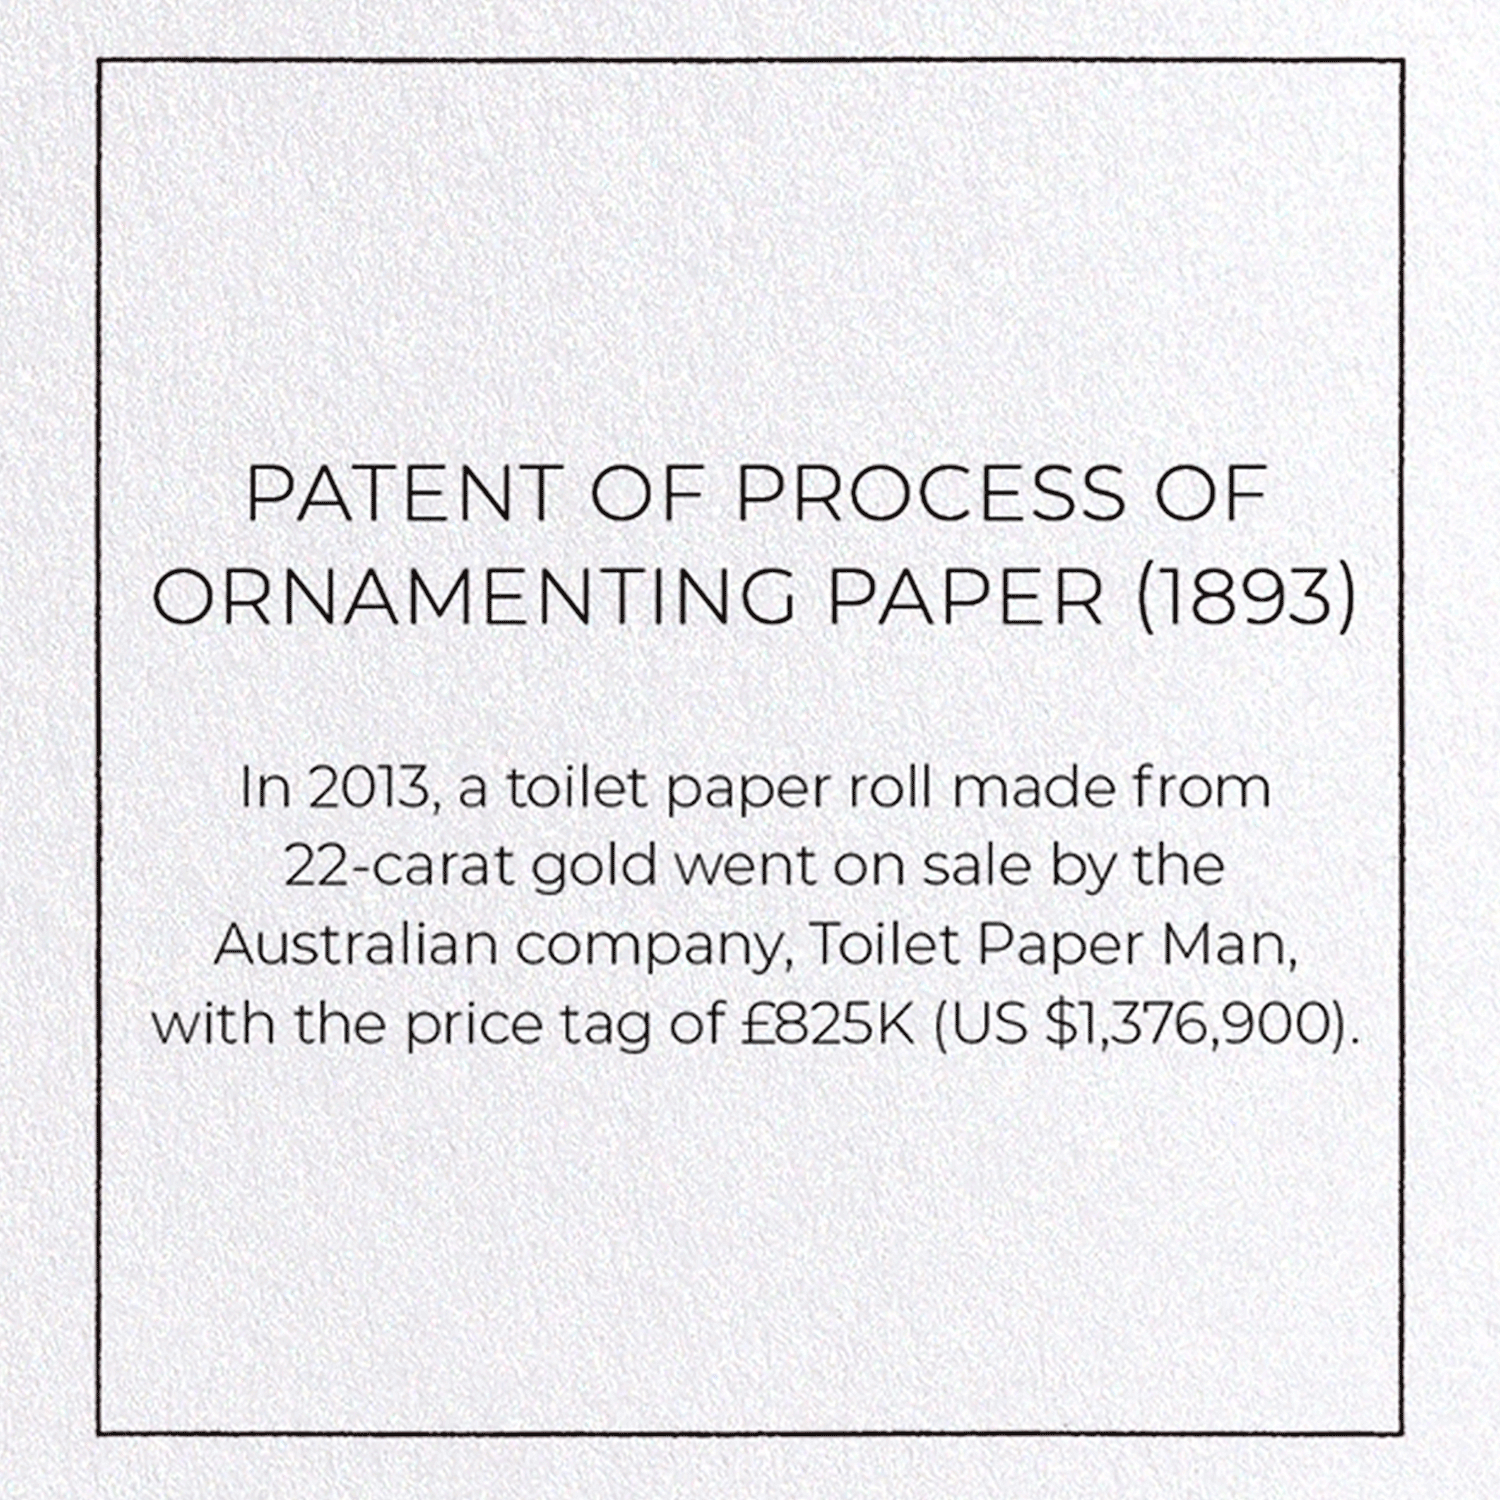 PATENT OF PROCESS OF ORNAMENTING PAPER (1893)